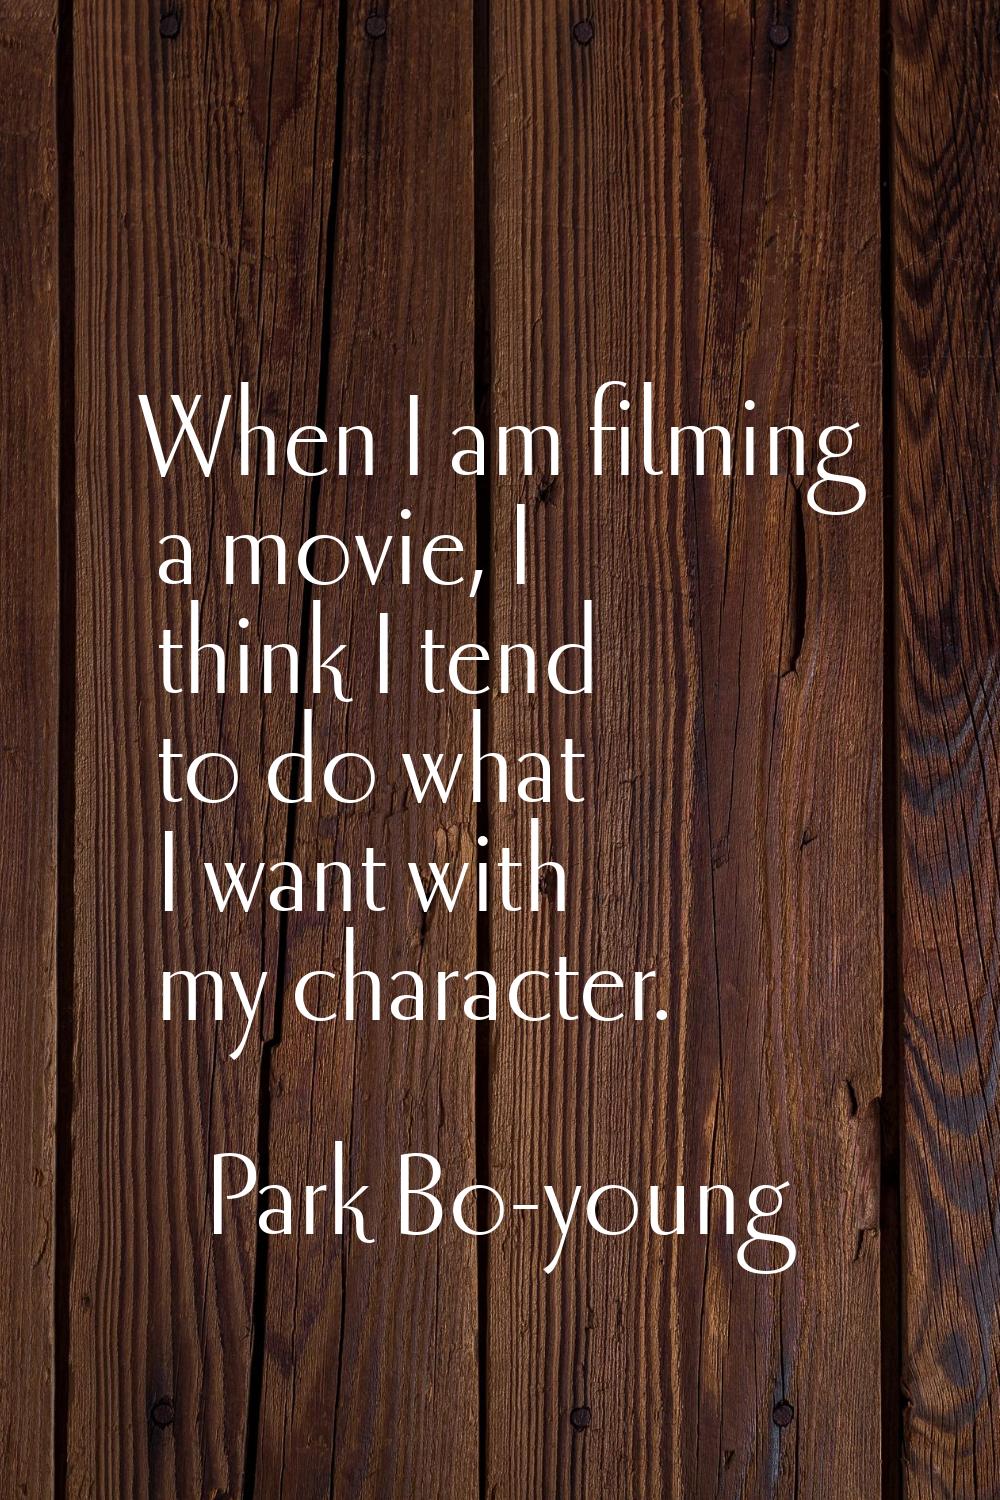 When I am filming a movie, I think I tend to do what I want with my character.